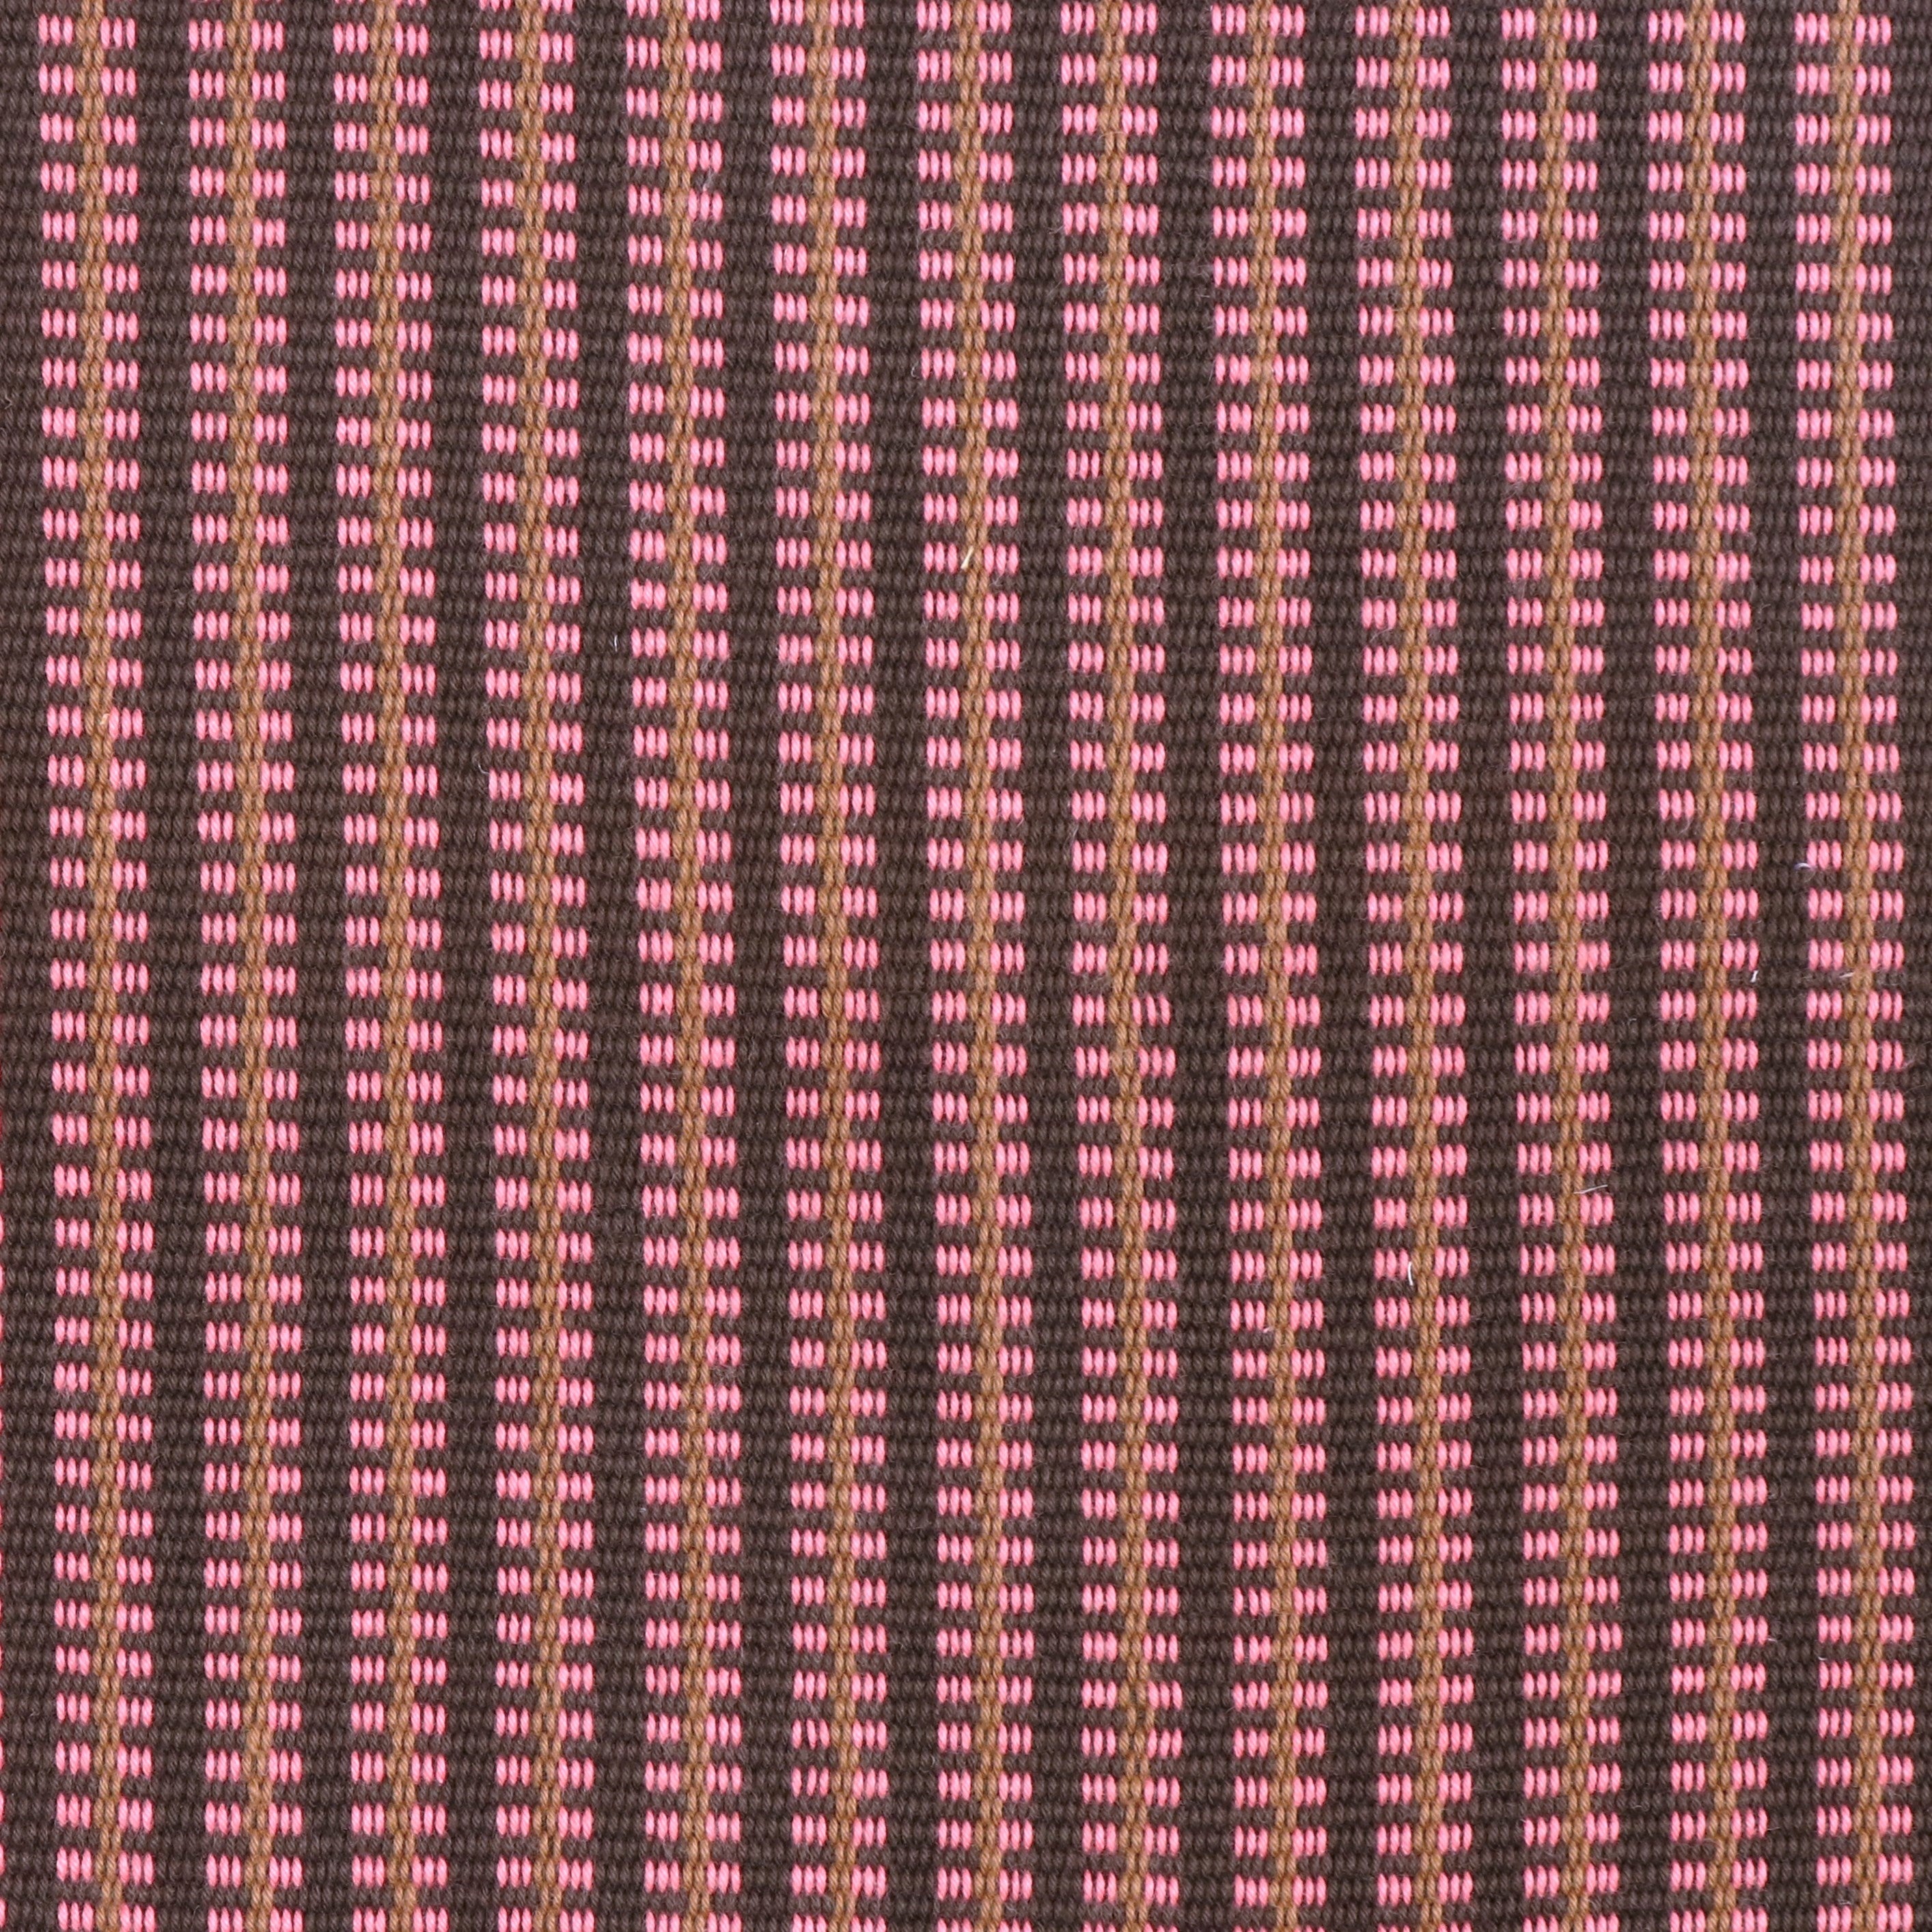 Detail of a hand-woven cotton fabric in an intricate stripe pattern in shades of brown, tan and pink.